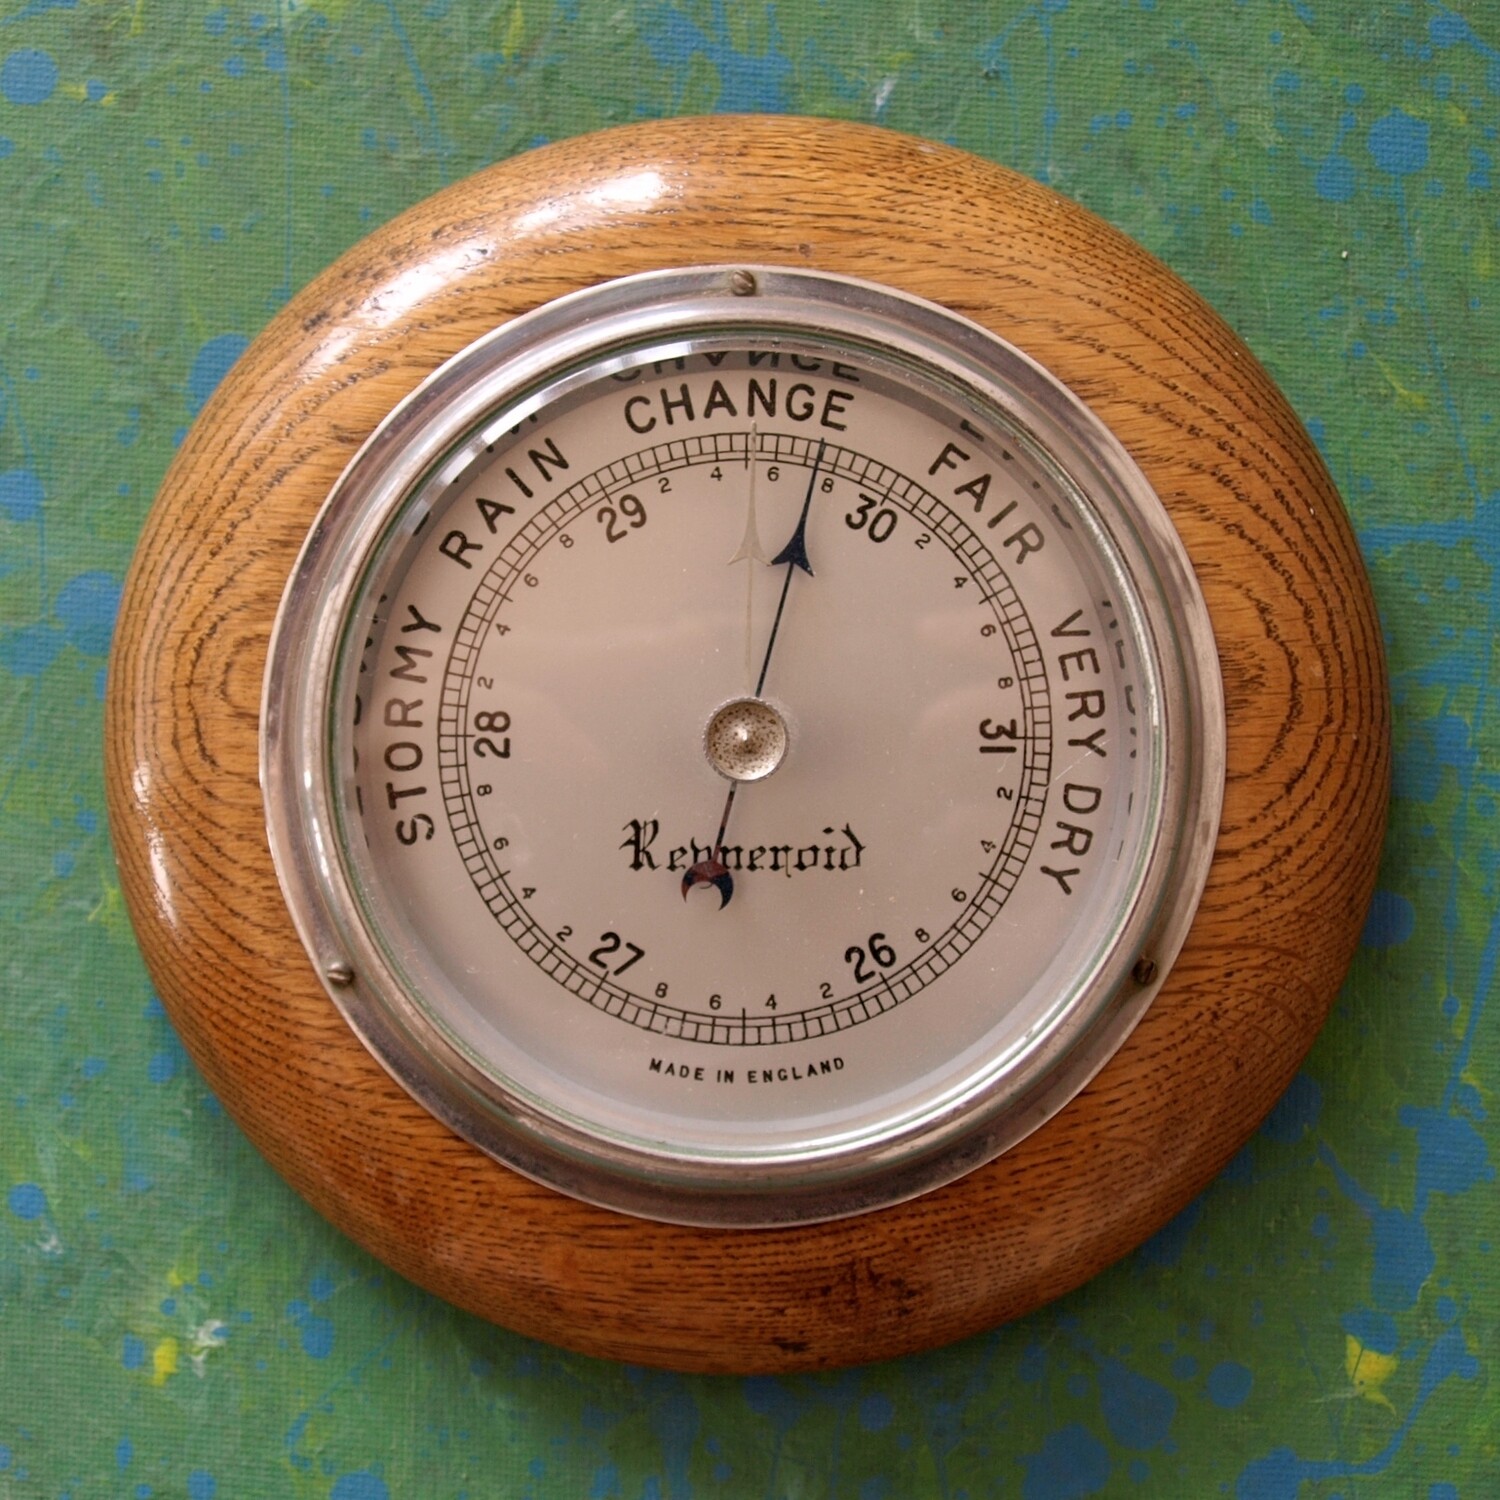 Vintage Regneroid Aneroid Thermometer Barometer With Oak Surround